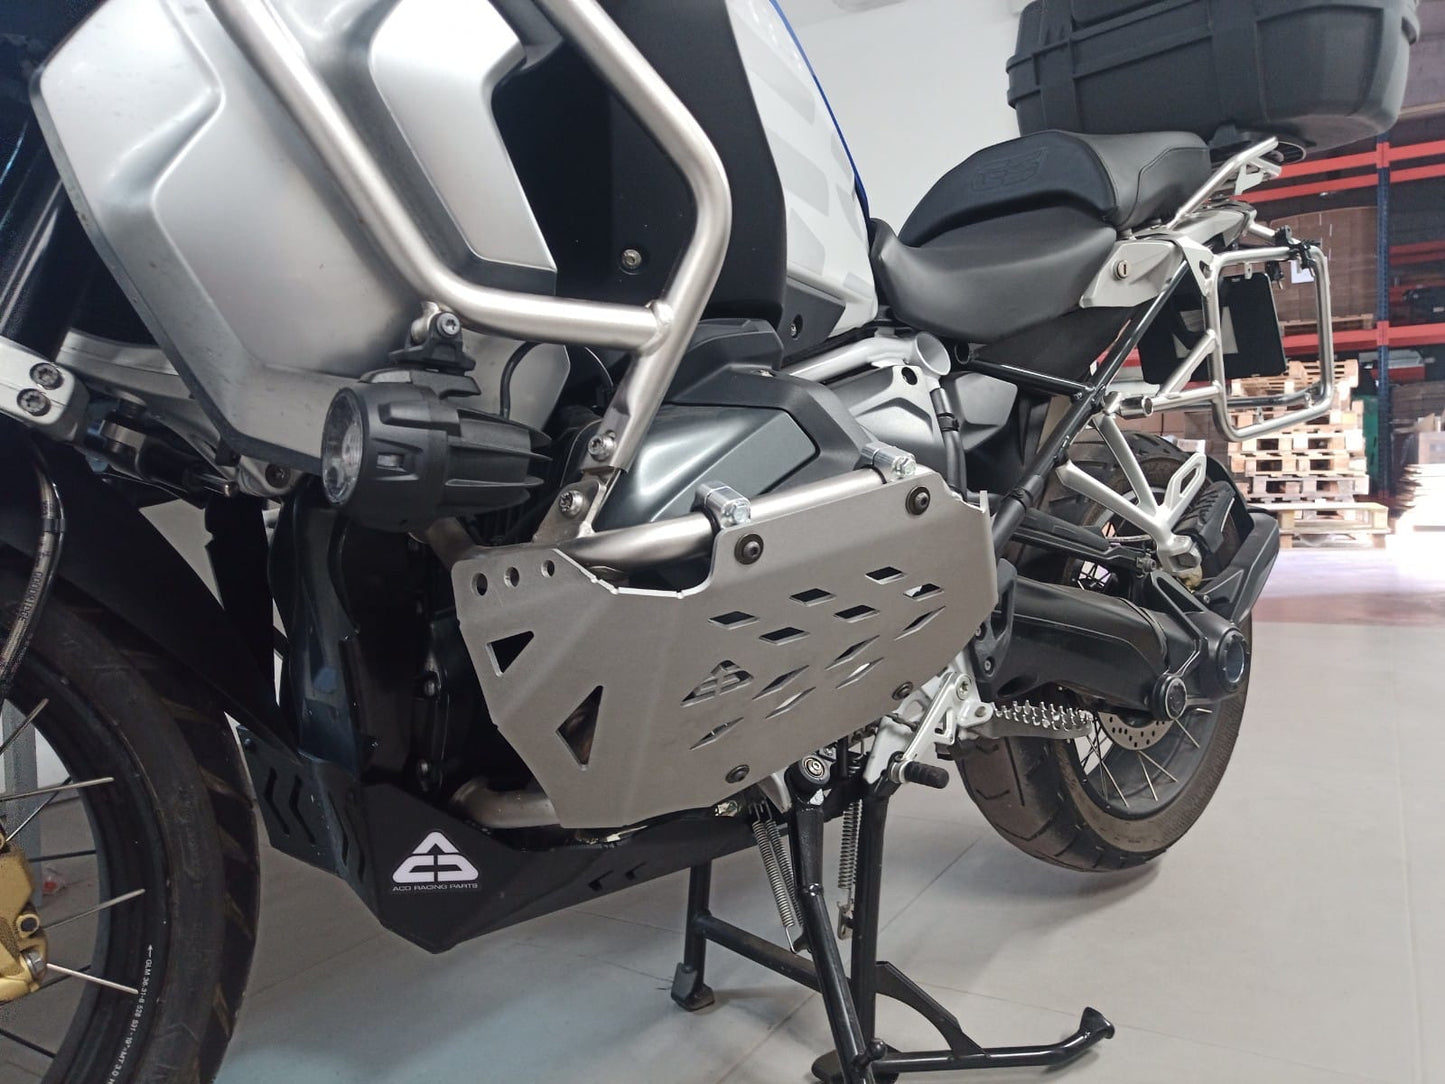 Set of Cylinder Head Guards for the BMW 1250 GS